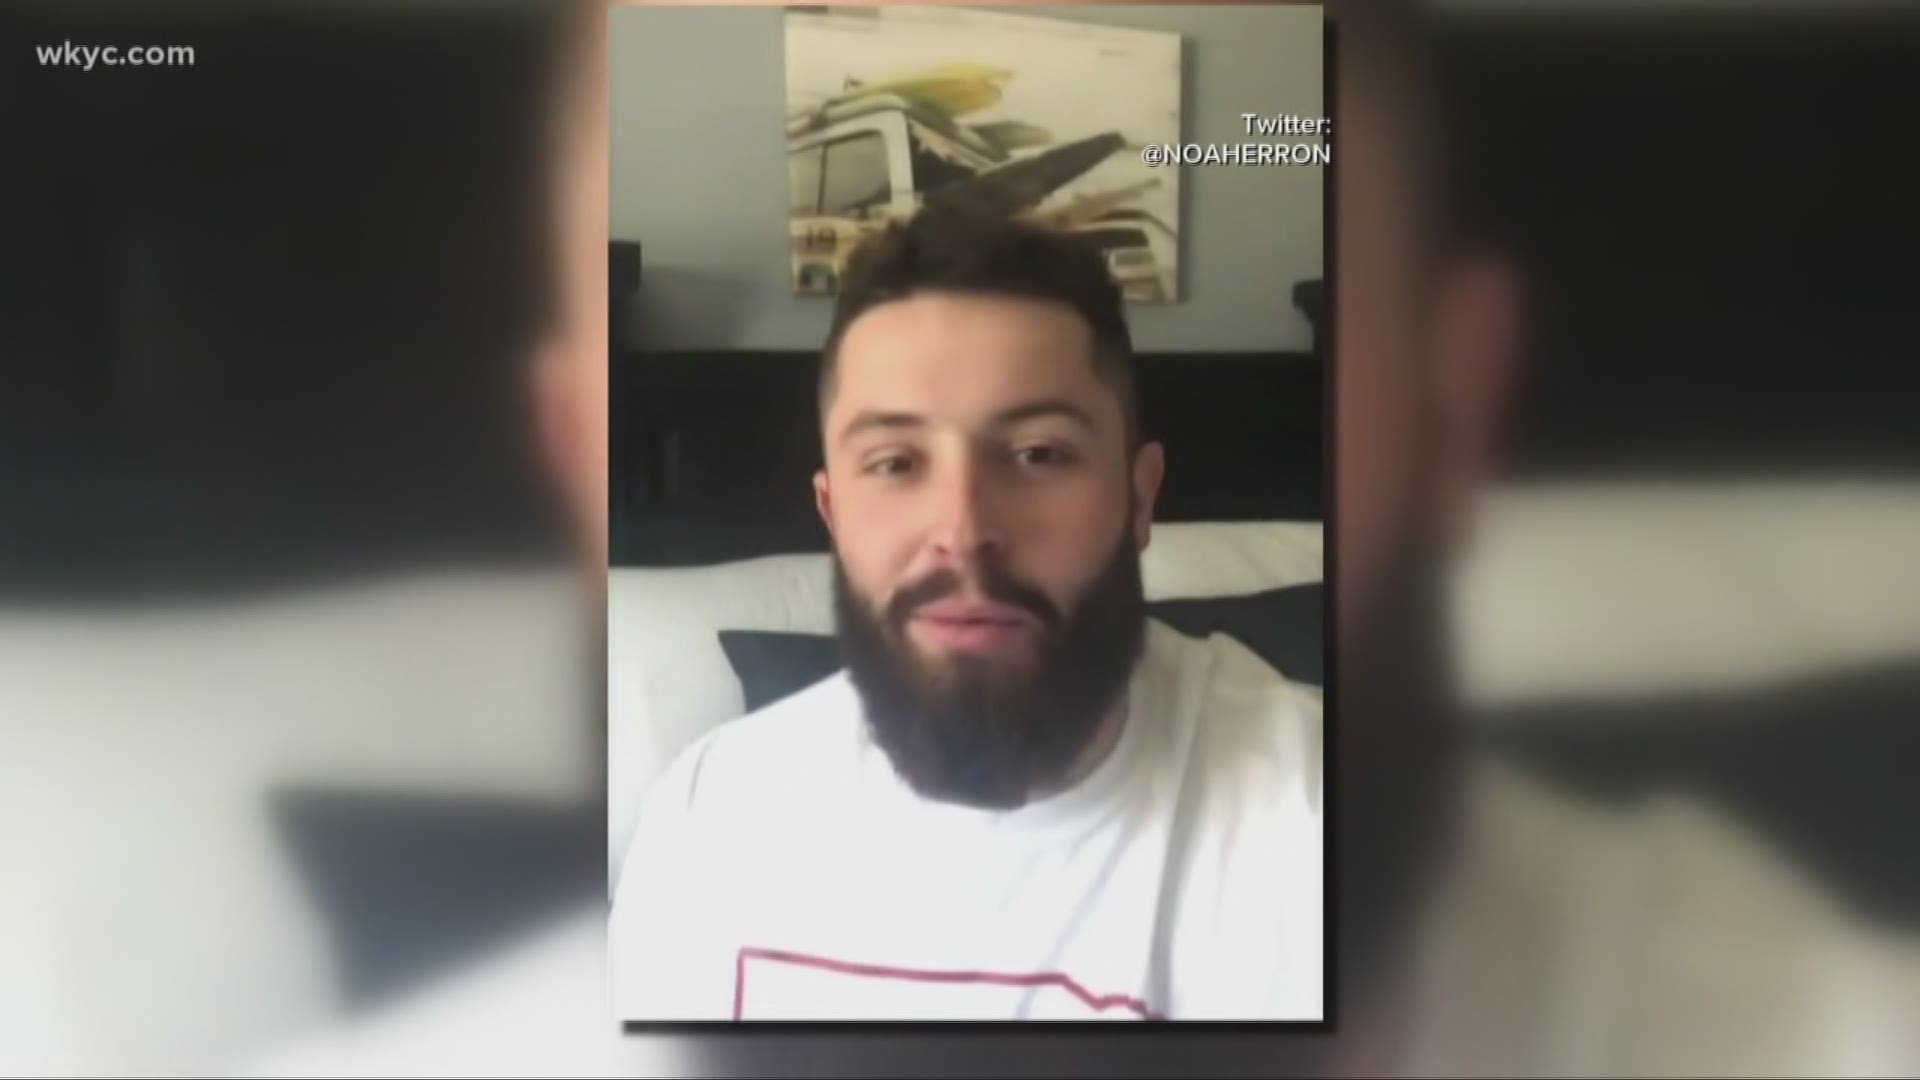 'Keep fighting' | Browns QB Baker Mayfield shares message of hope with Brunswick cancer survivor